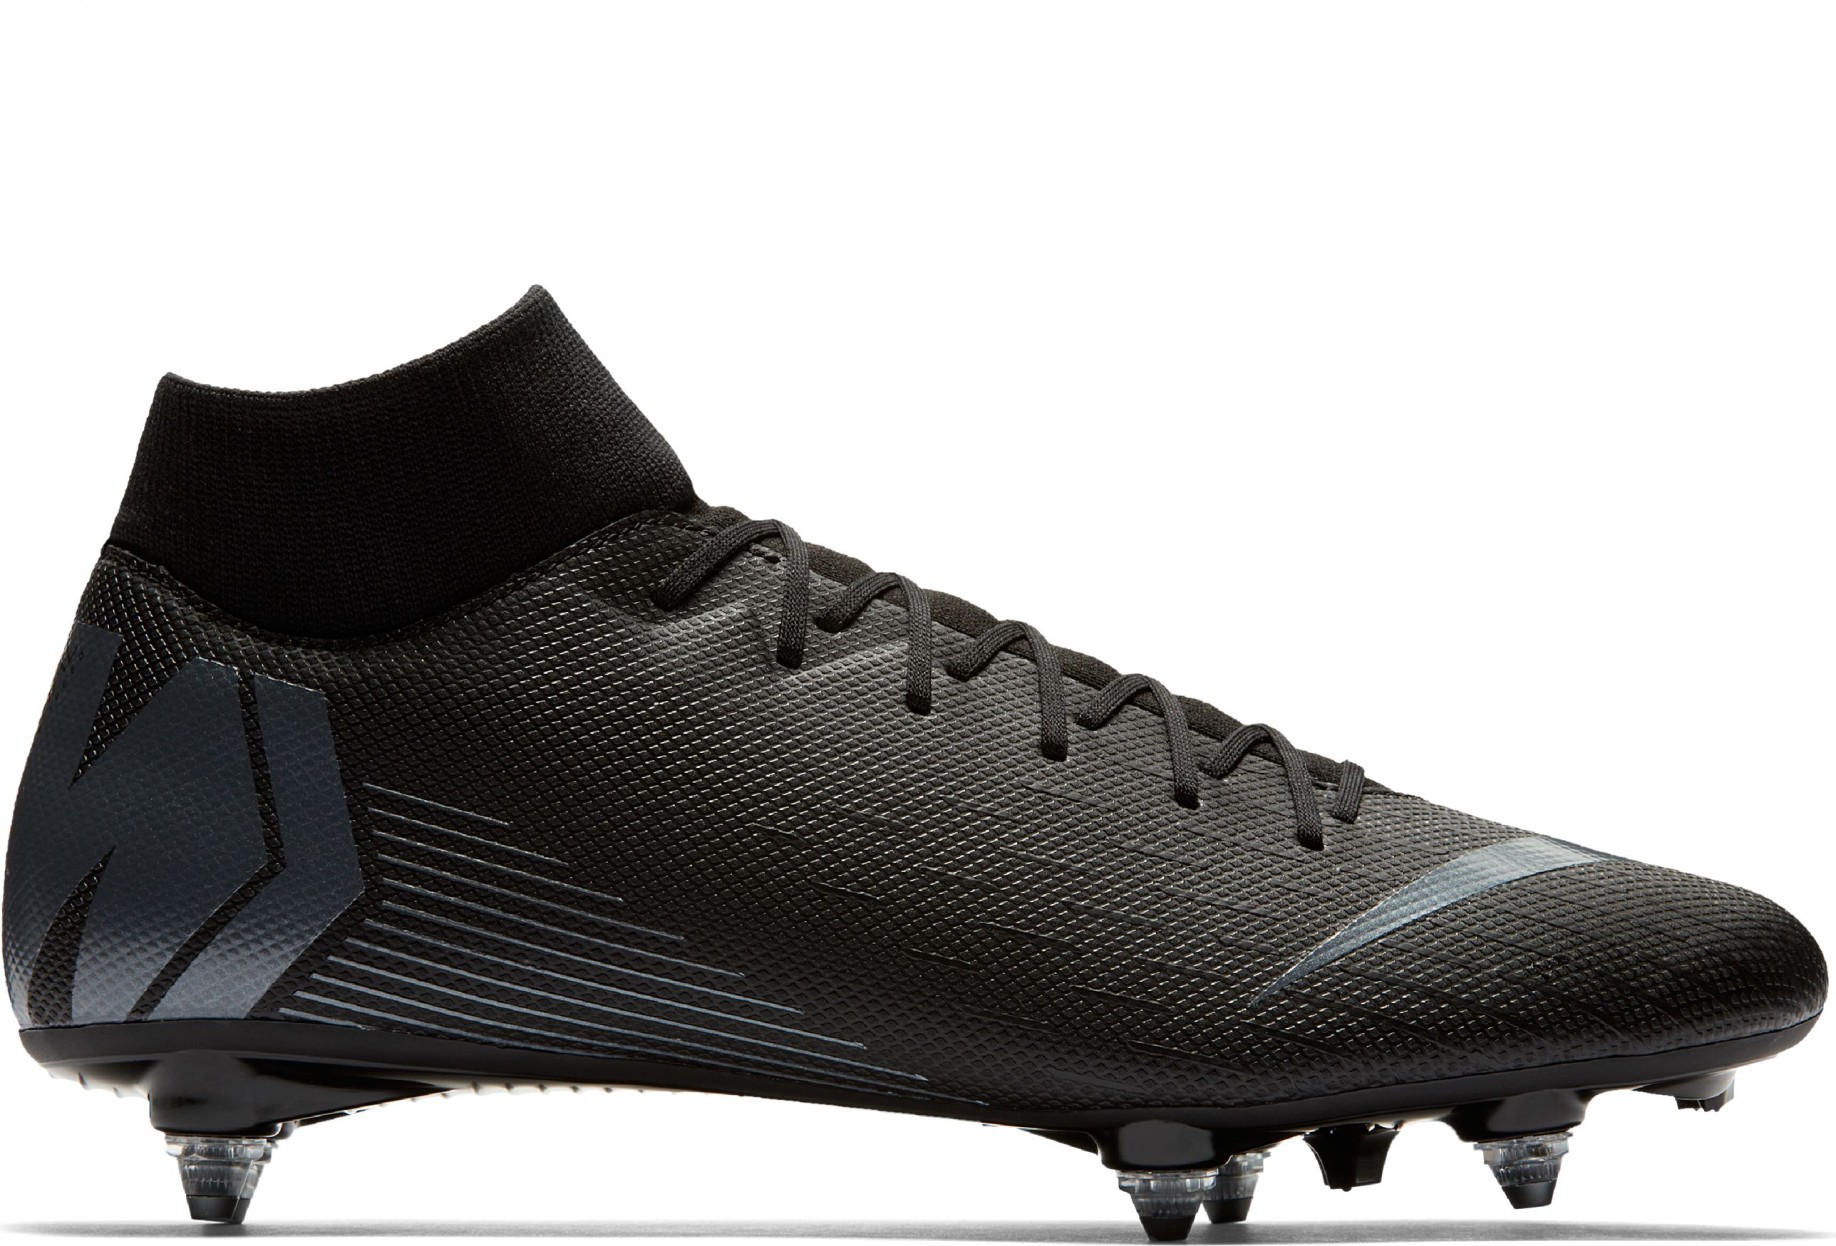 stealth ops mercurial superfly 360